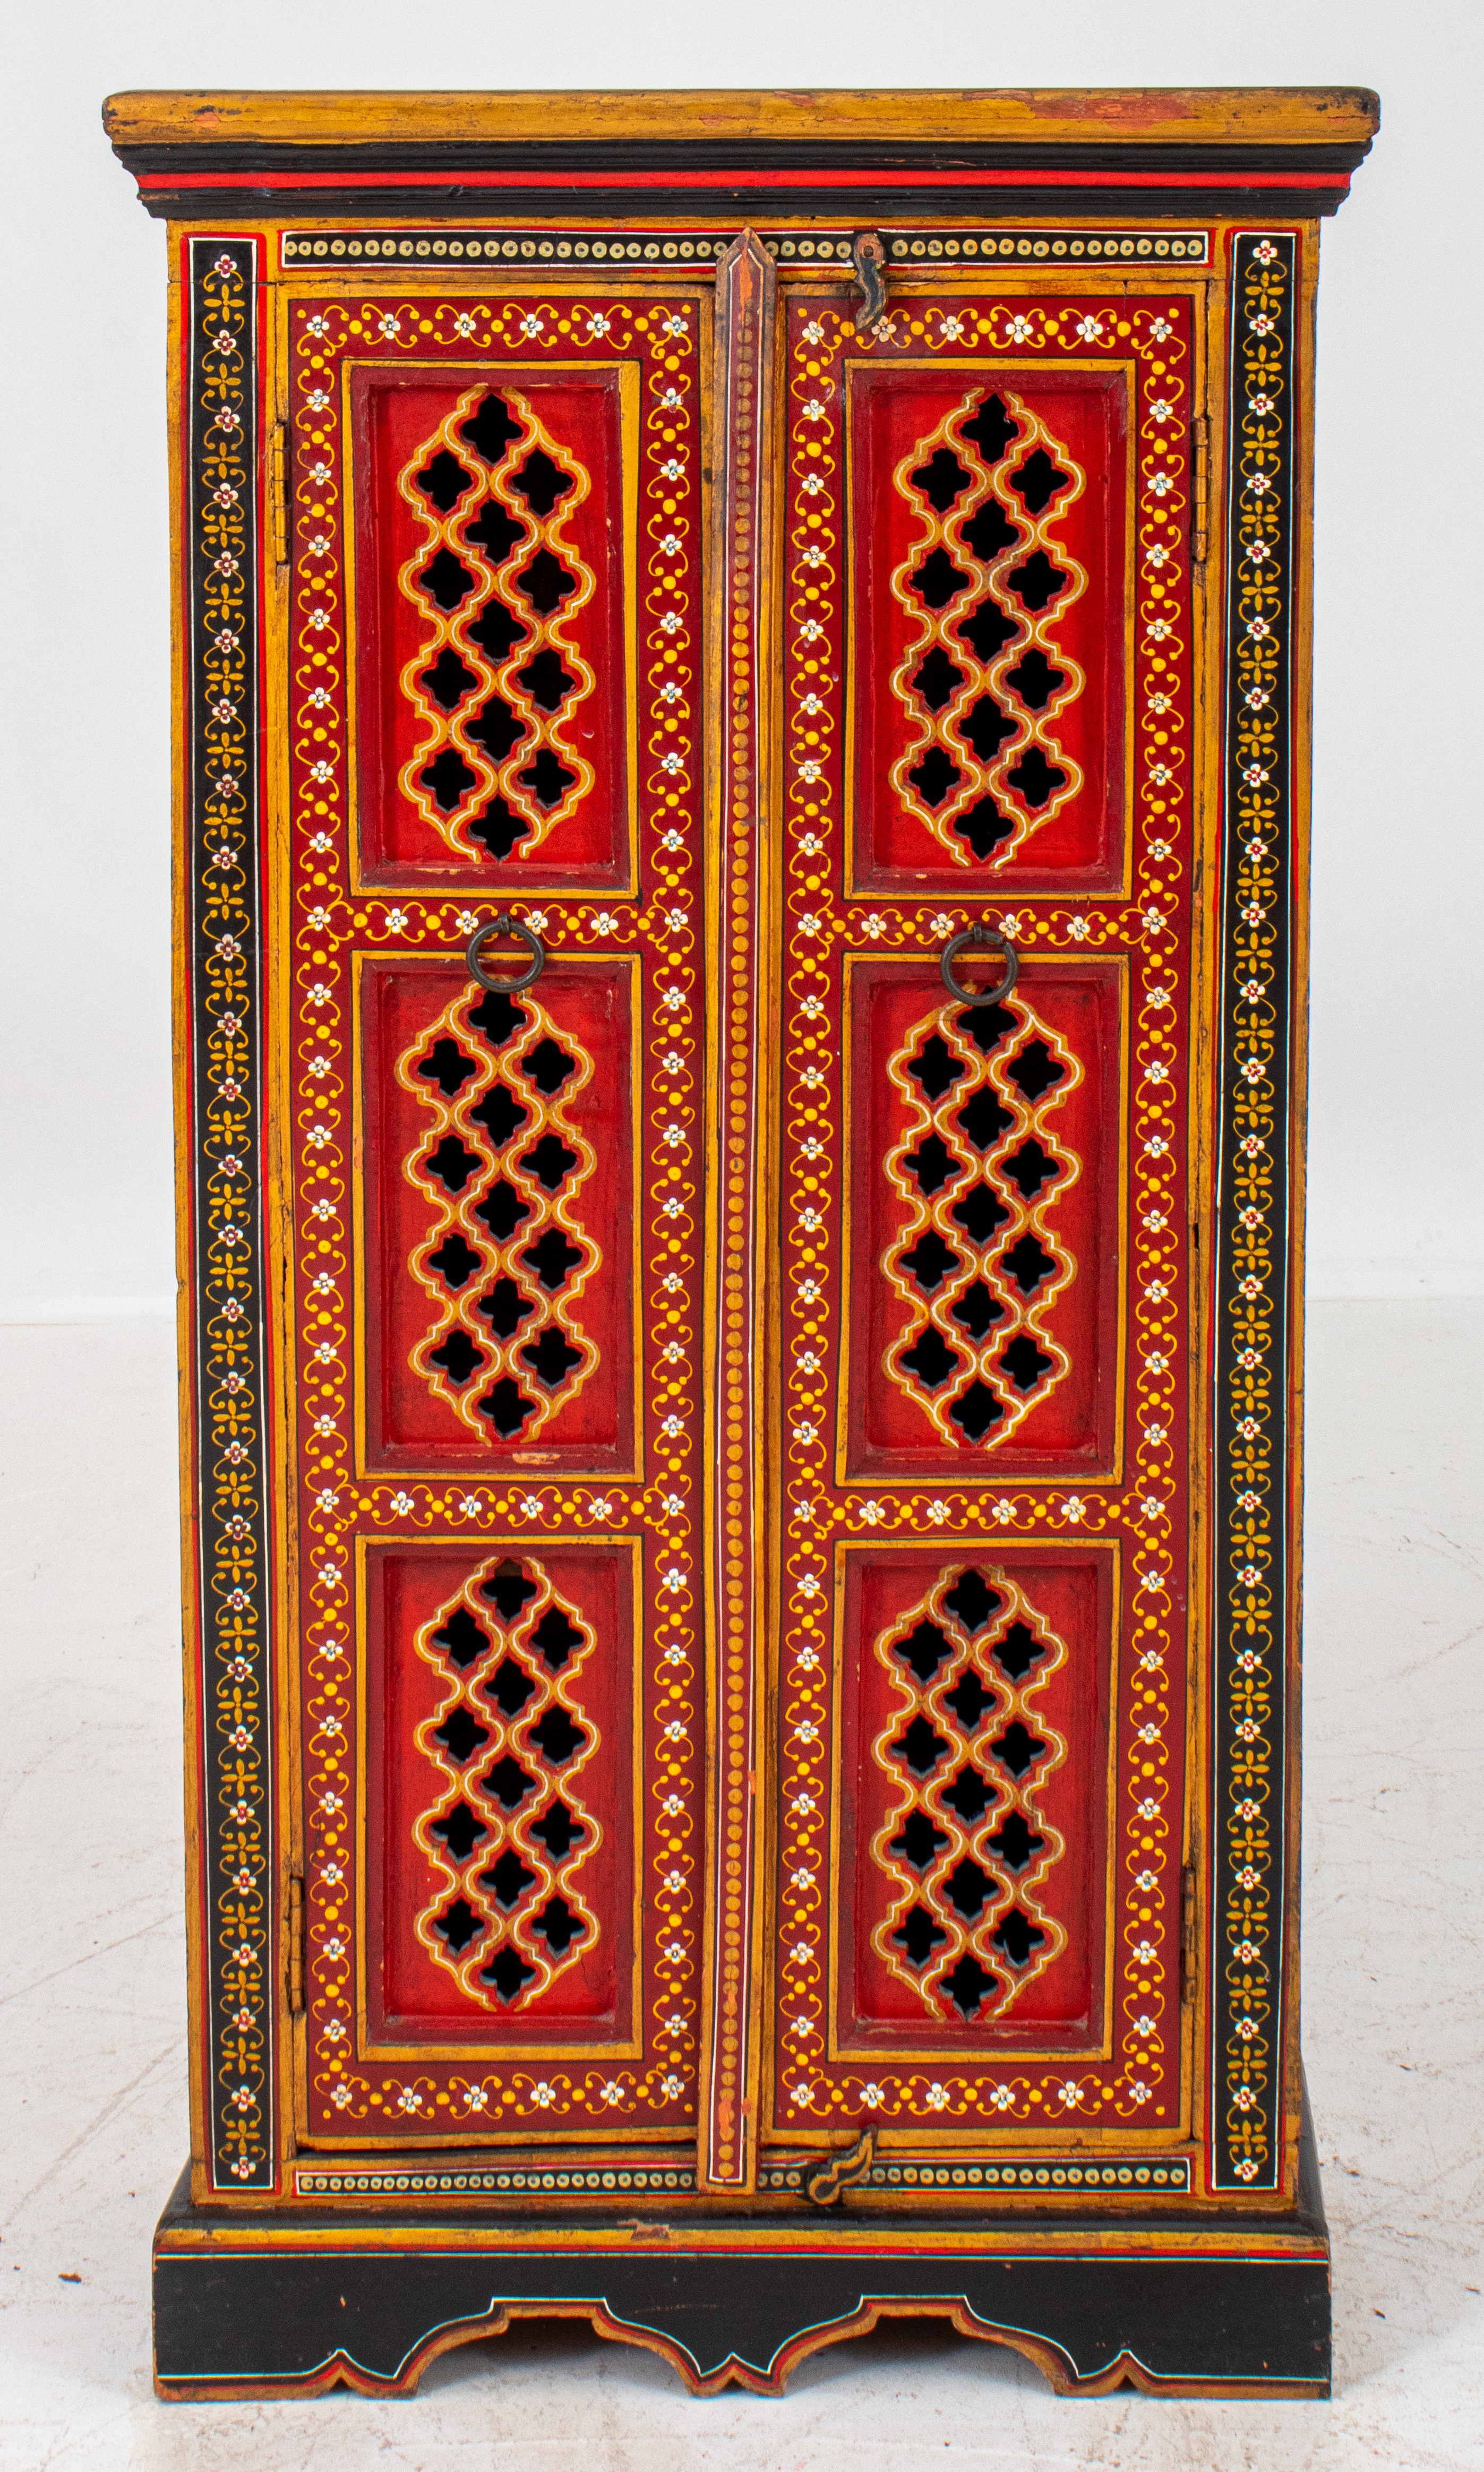 INDIAN HAND PAINTED WOODEN CABINET 2bd4e0